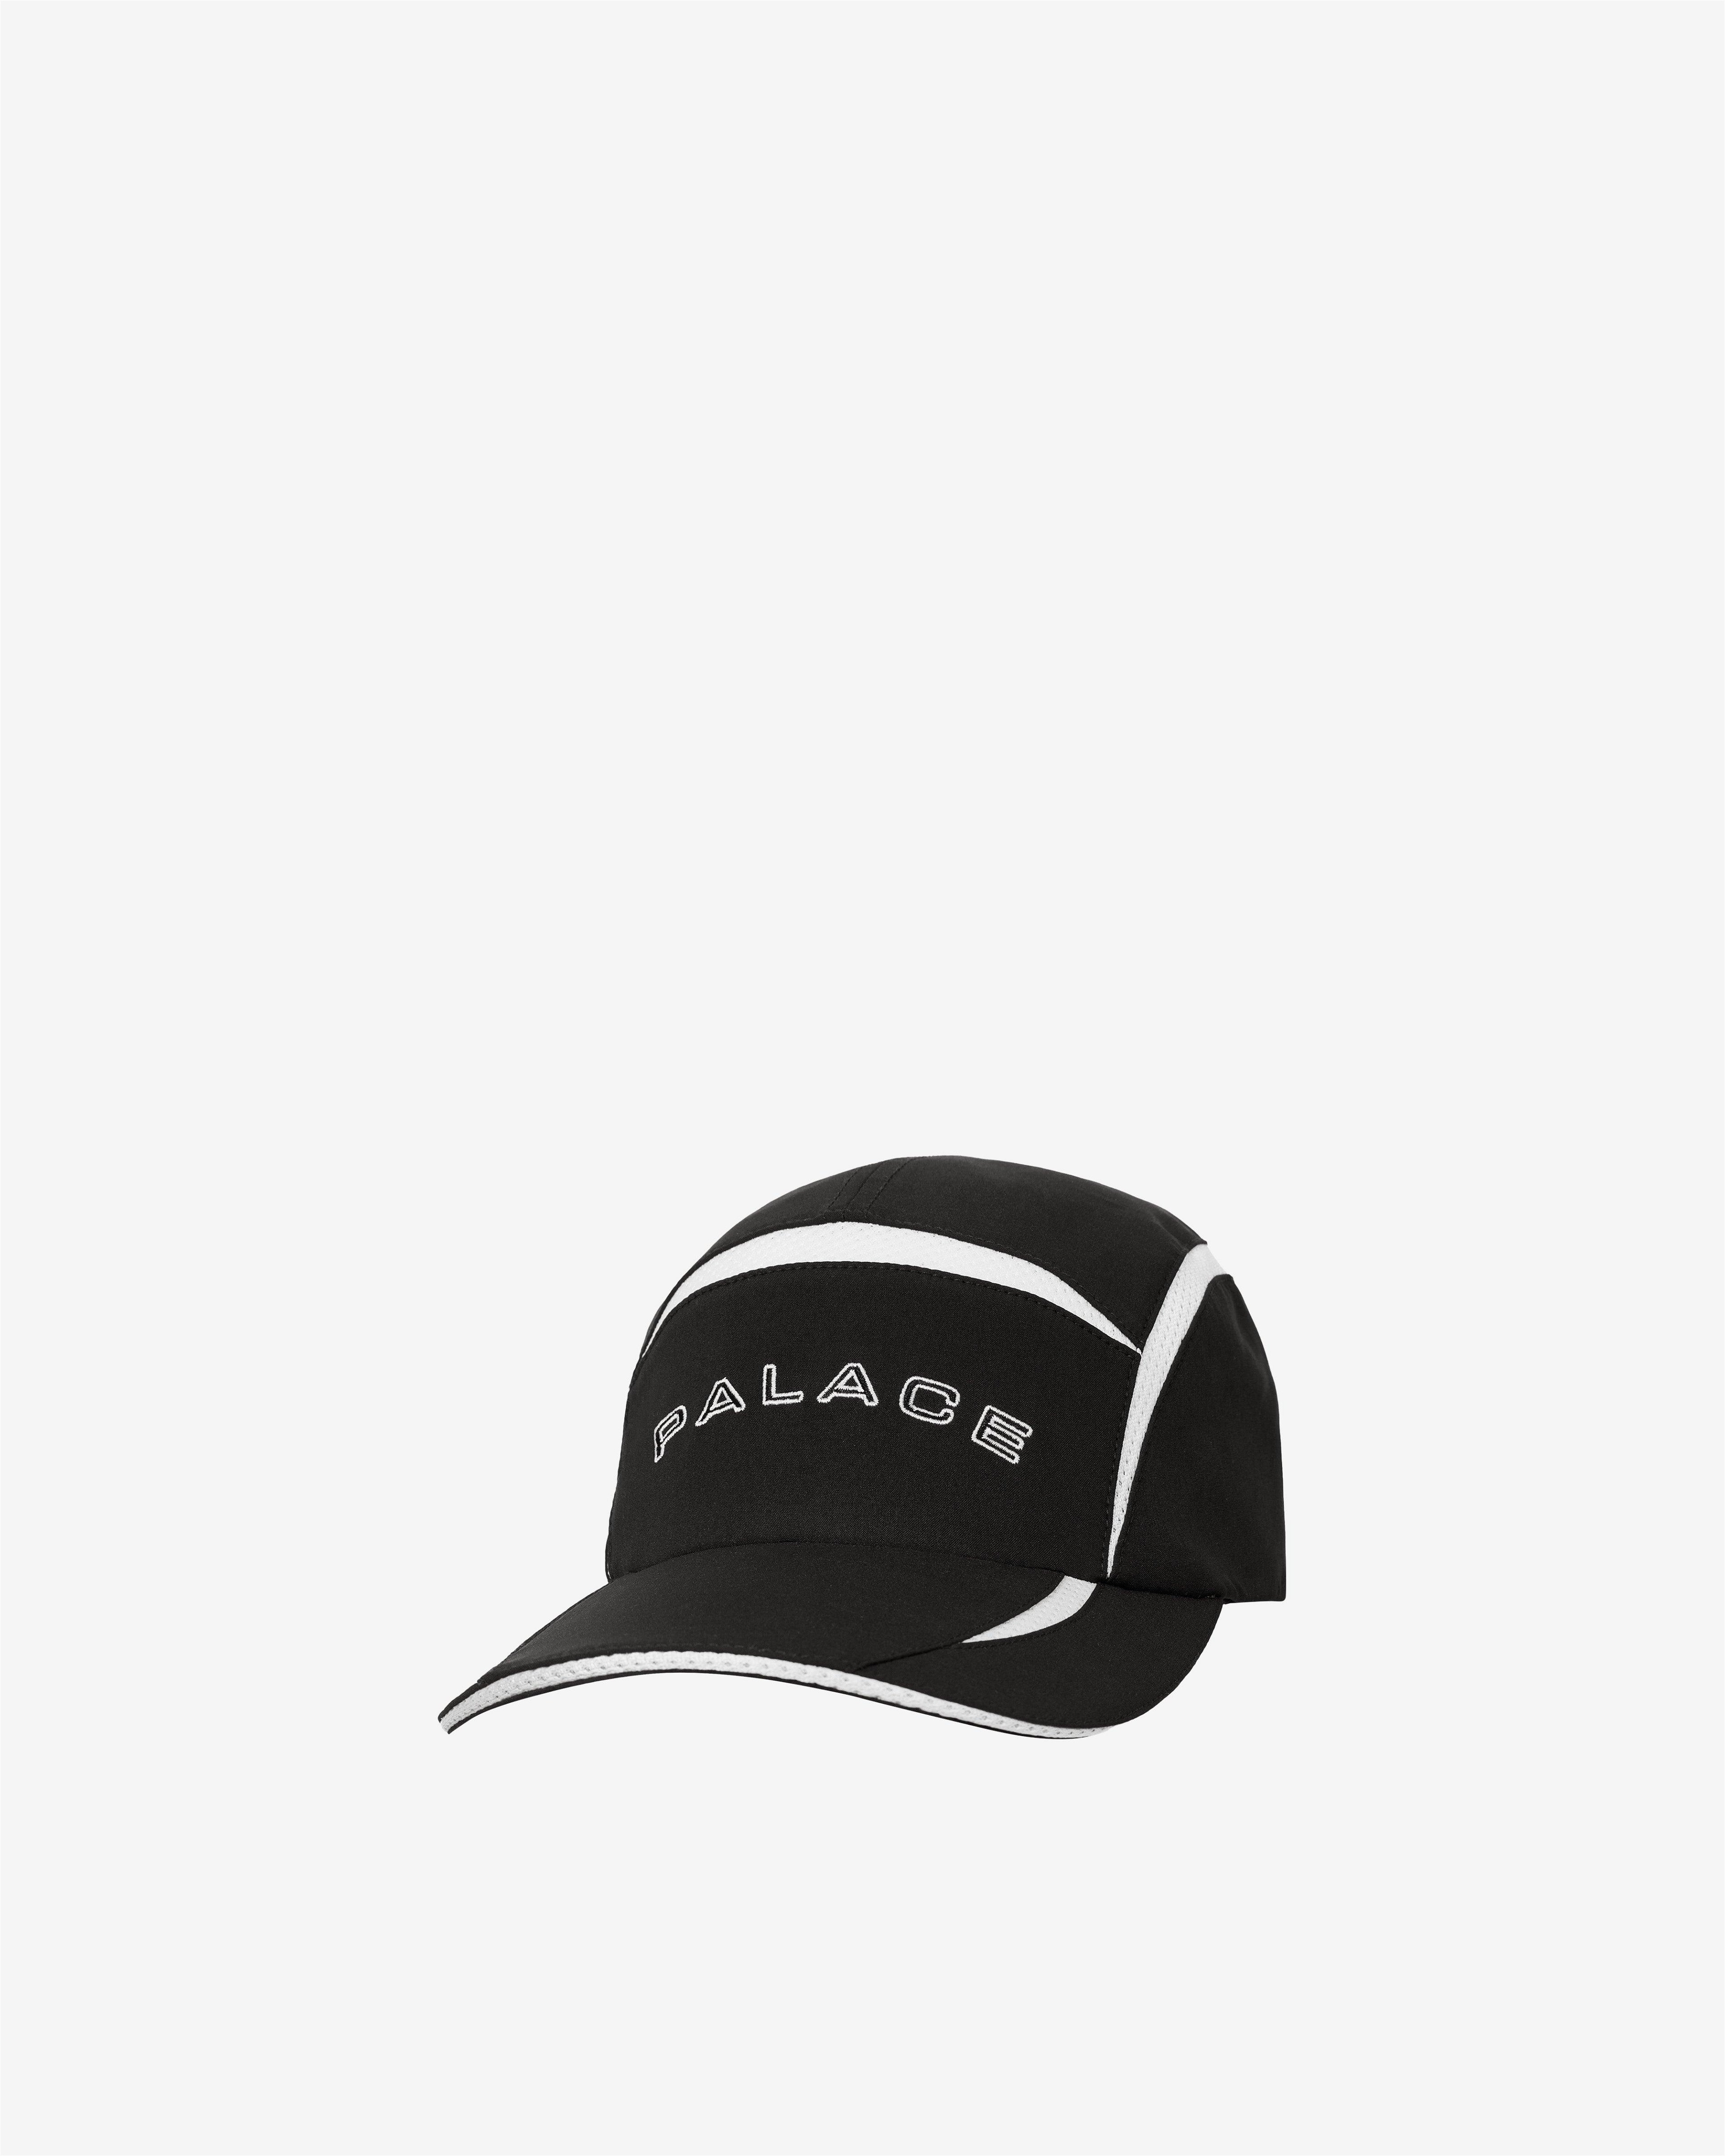 Palace - Men's Arc Shell Runner - (Black) by PALACE